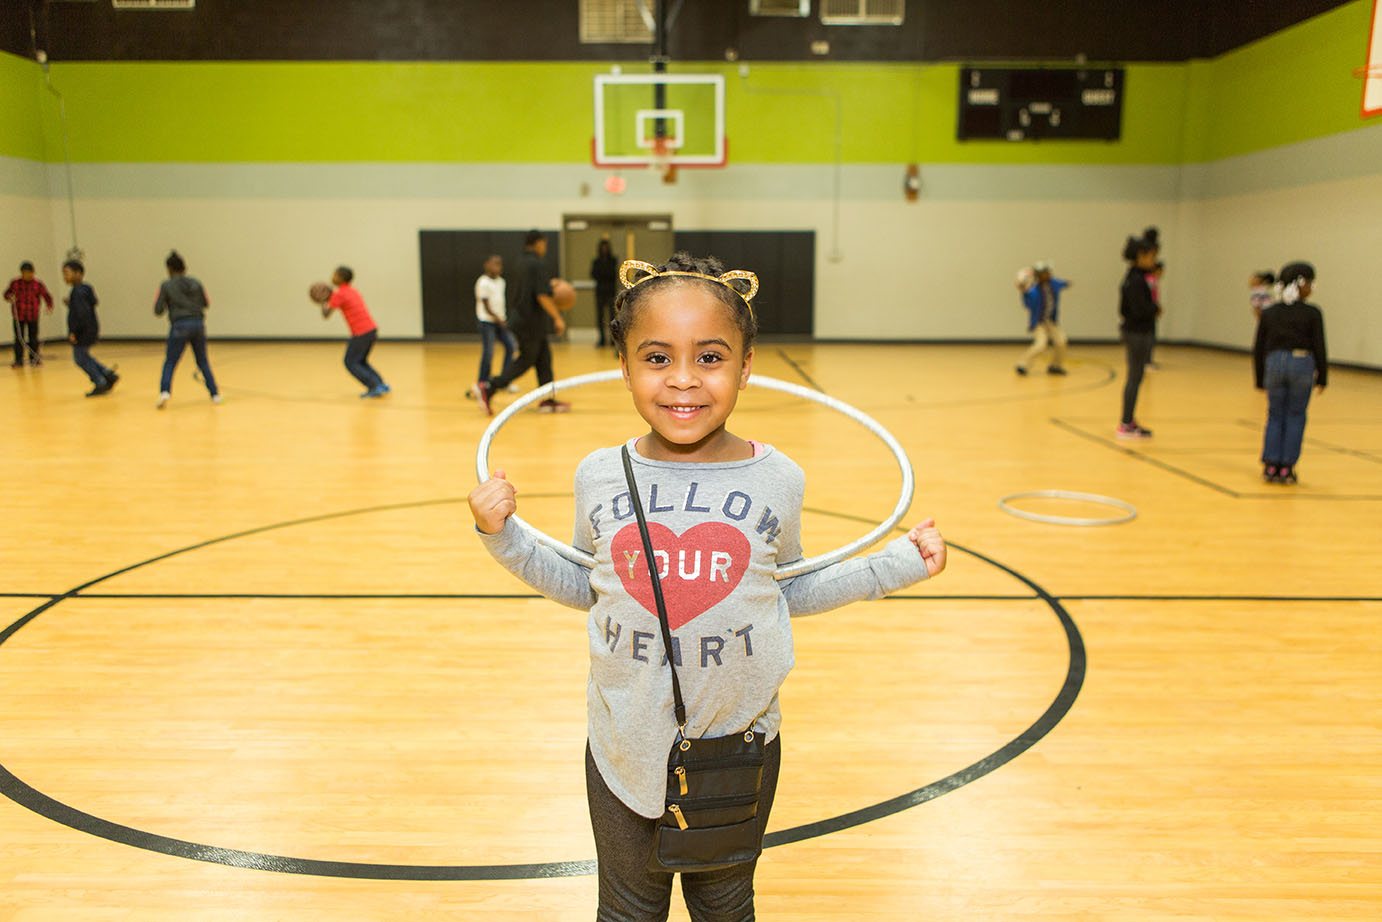 Boys & Girls Club of Greater High Point